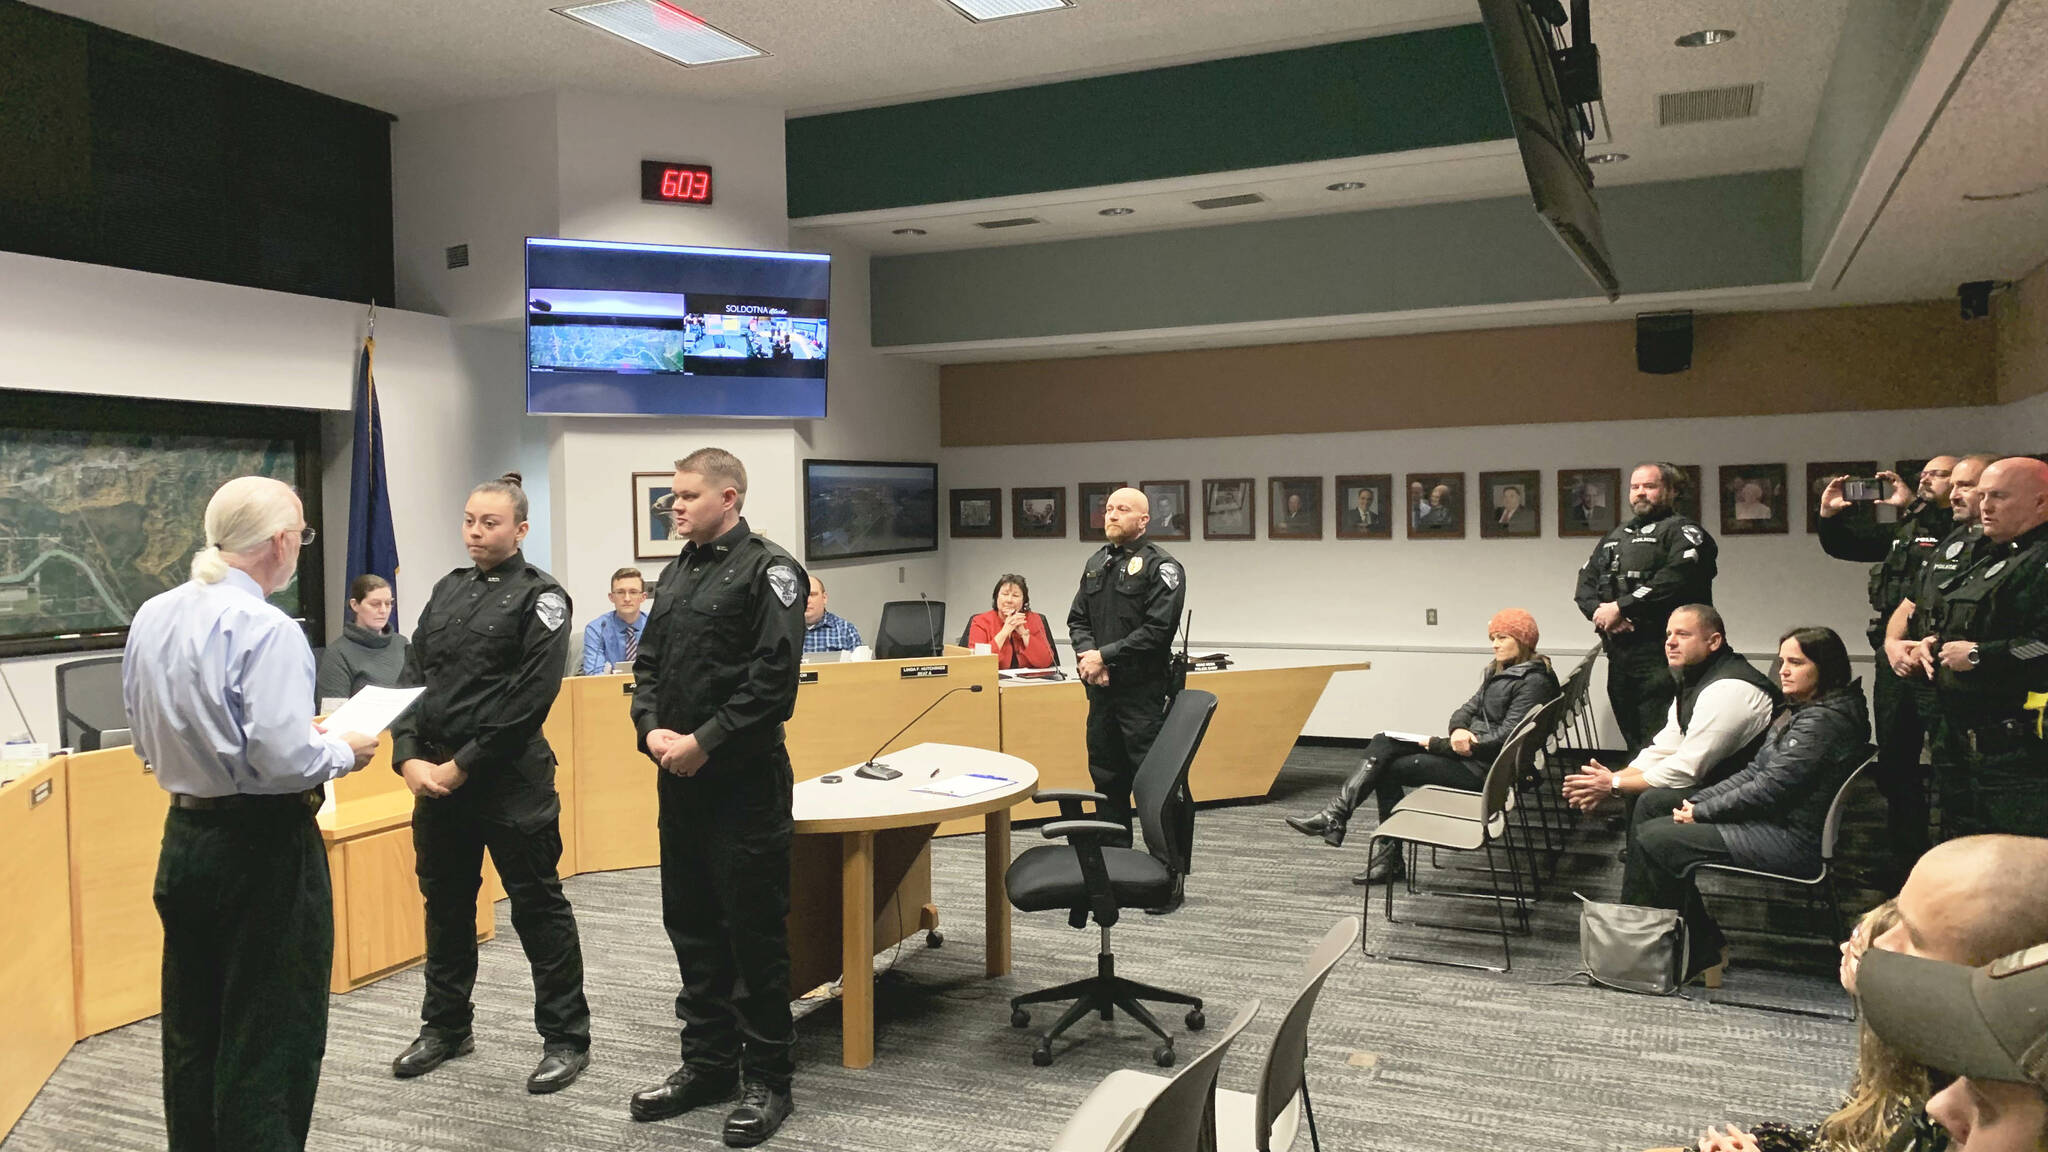 From left, Soldotna Mayor Paul Whitney swears in new Soldotna Police Officers AJ Fresquez and Reid Culver while Police Chief Dale "Gene" Meek and other officers look on during a meeting of the Soldotna City Council on Wednesday, Nov. 9, 2022 in Soldotna, Alaska. (Ashlyn O'Hara/Peninsula Clarion)